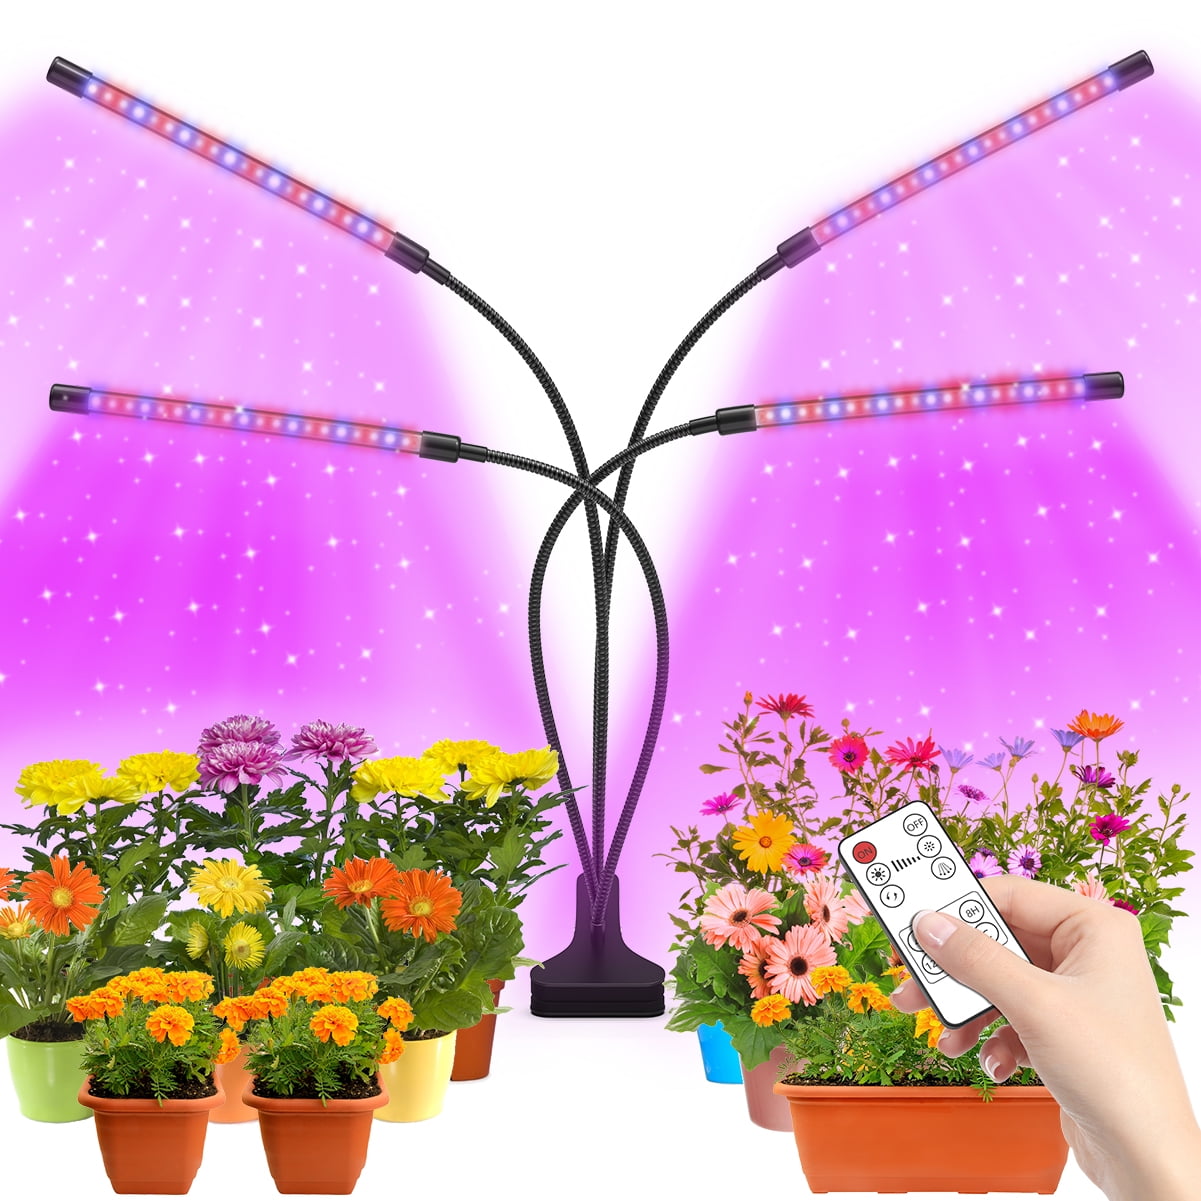 Led Grow Light for Indoor Plants 85W 264Led 4 Switch Modes 9 Dimmable Levels 3 6 9 12H Timer Adjustable Plant Light with Full Spectrum Red Blue Spectrum for House Garden Hydroponics Succulent Growing 